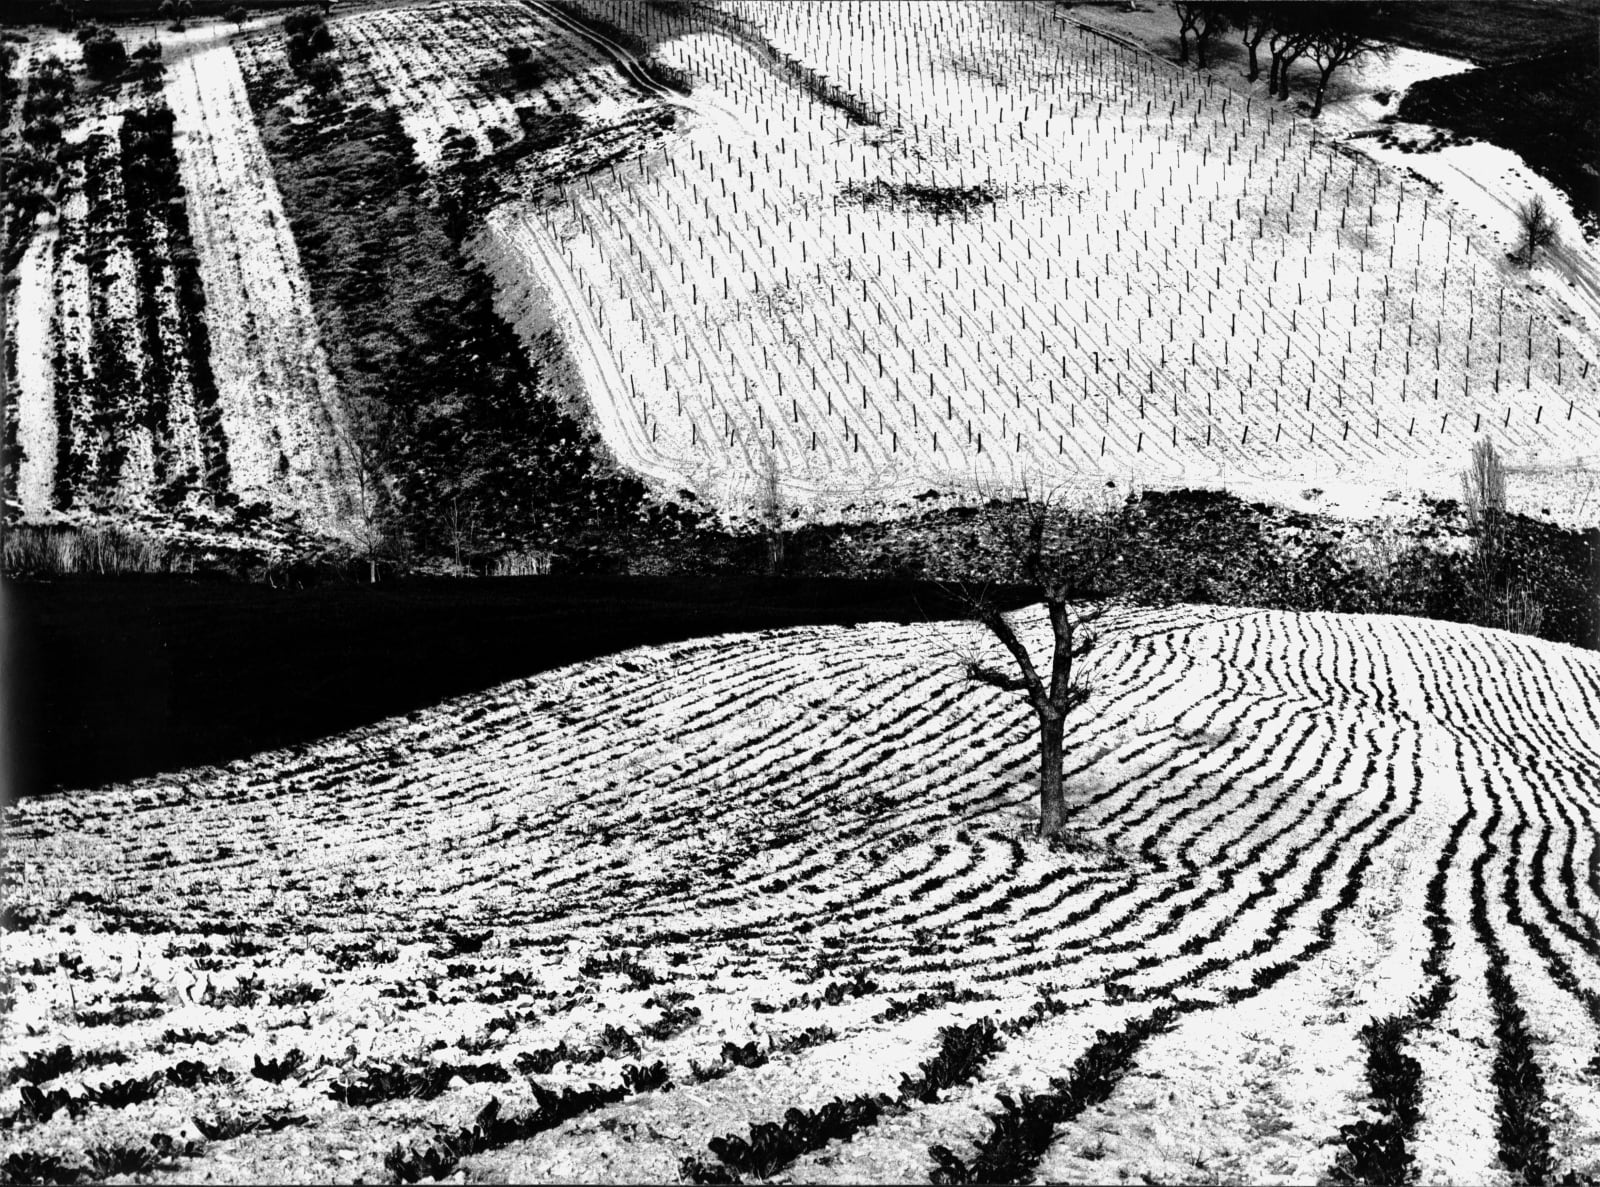 Mario Giacomelli, Paesaggio 283; Metamorphosis of the Land, (from the series On Being Aware of Nature), 1968